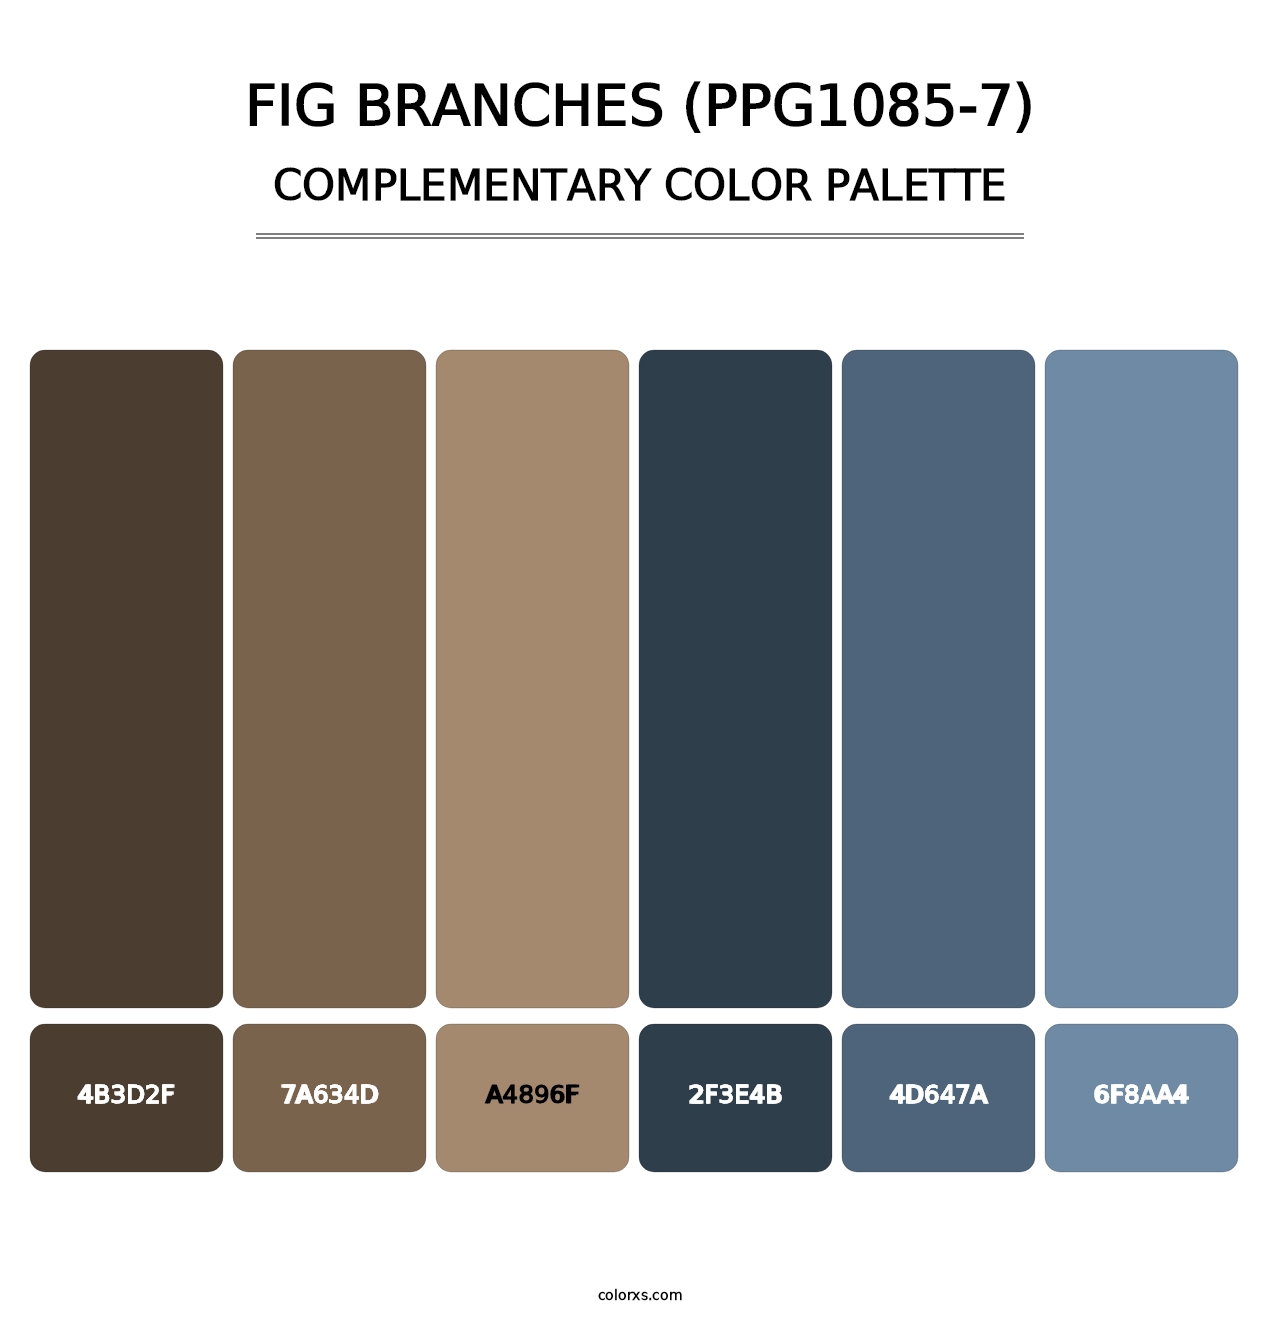 Fig Branches (PPG1085-7) - Complementary Color Palette